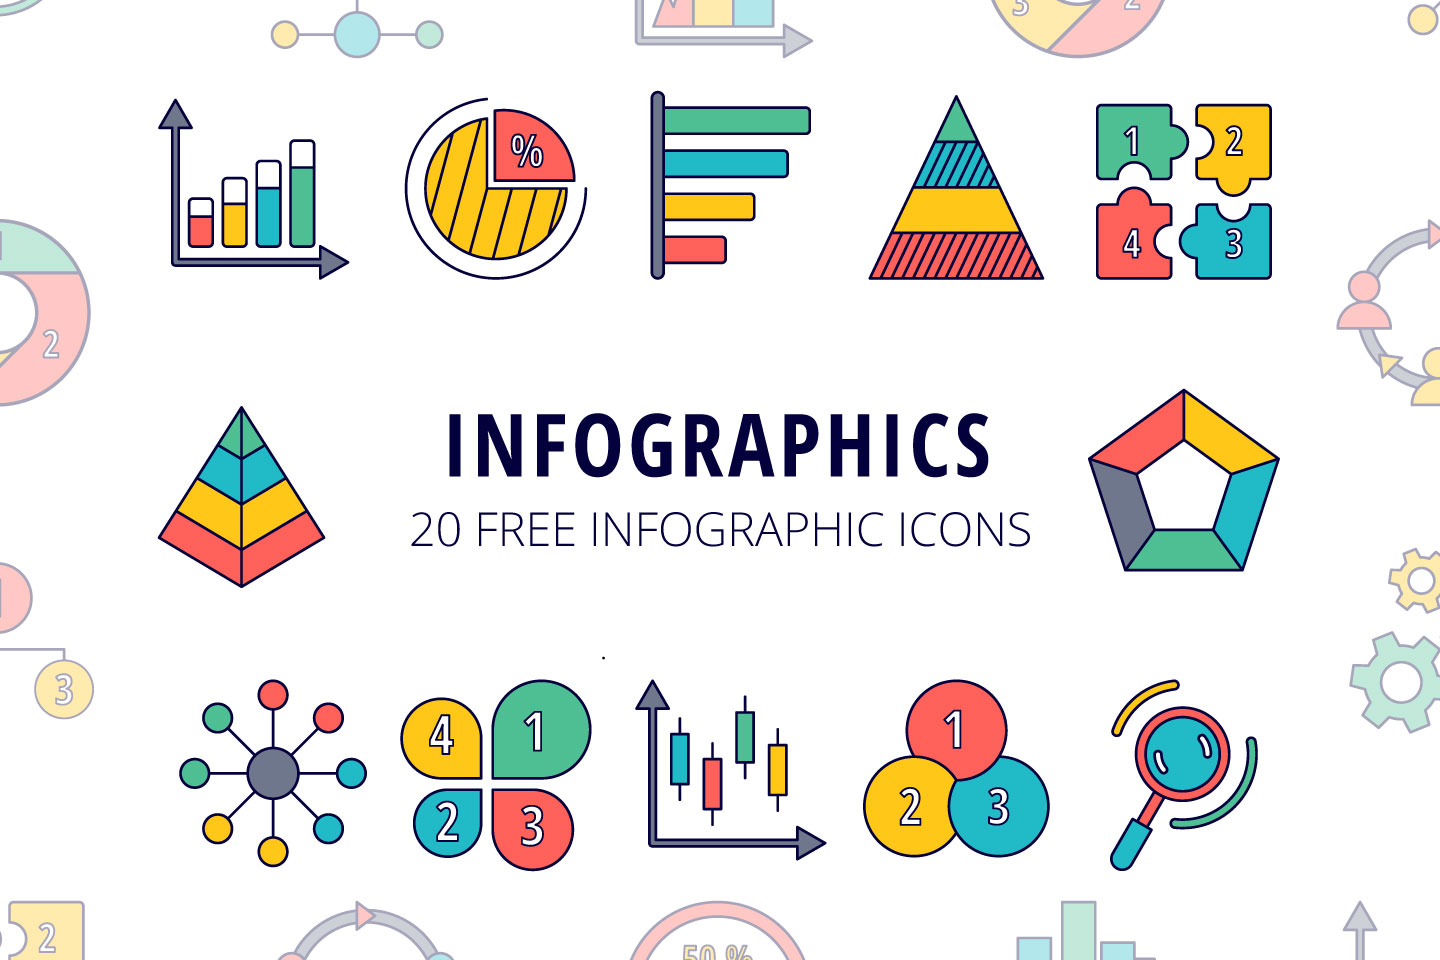 infographic icons detail